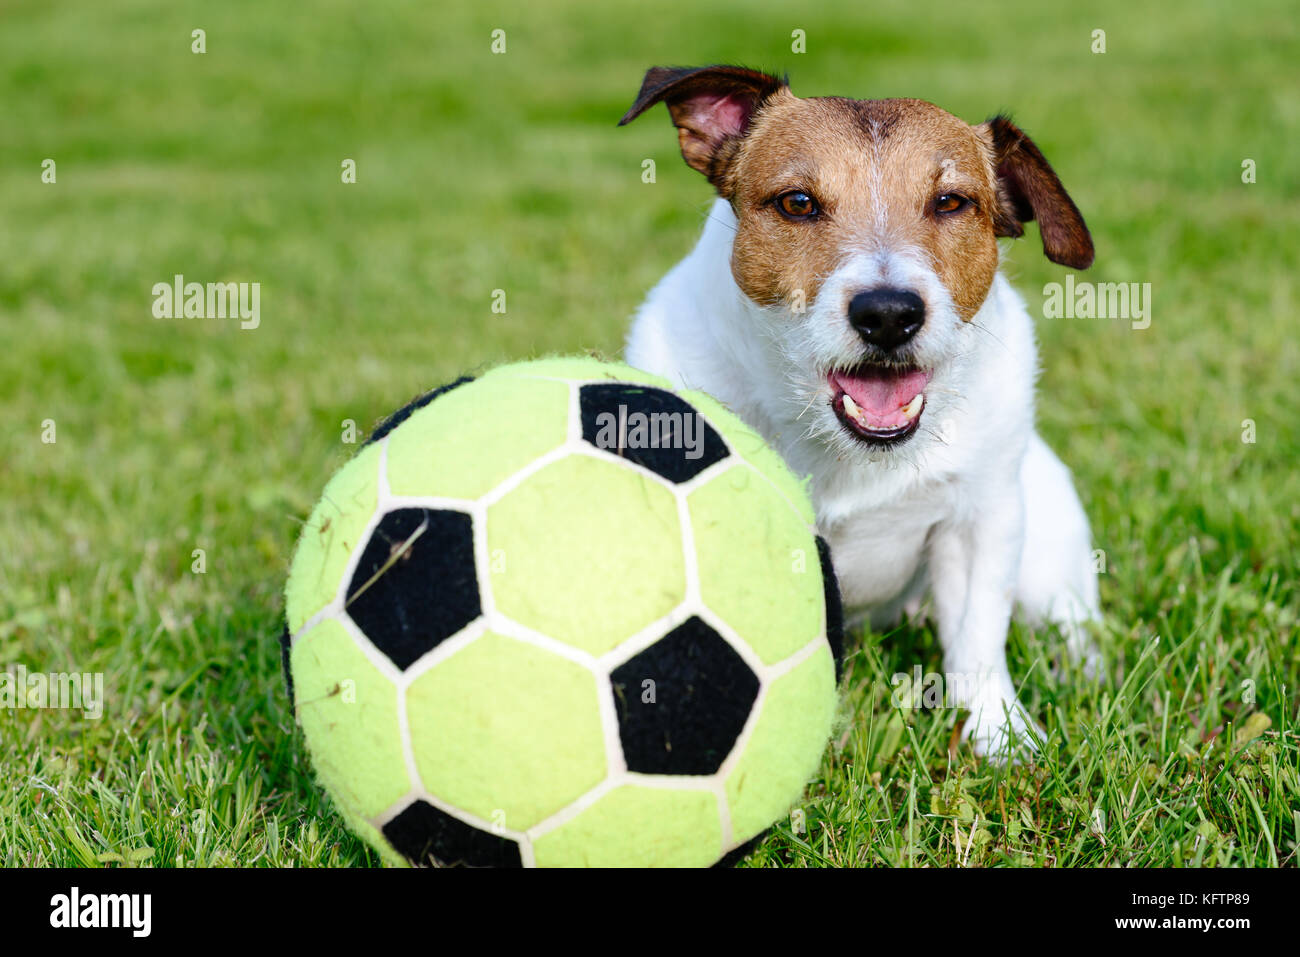 Dog with funny ears resting after football (soccer) game on playground turf Stock Photo